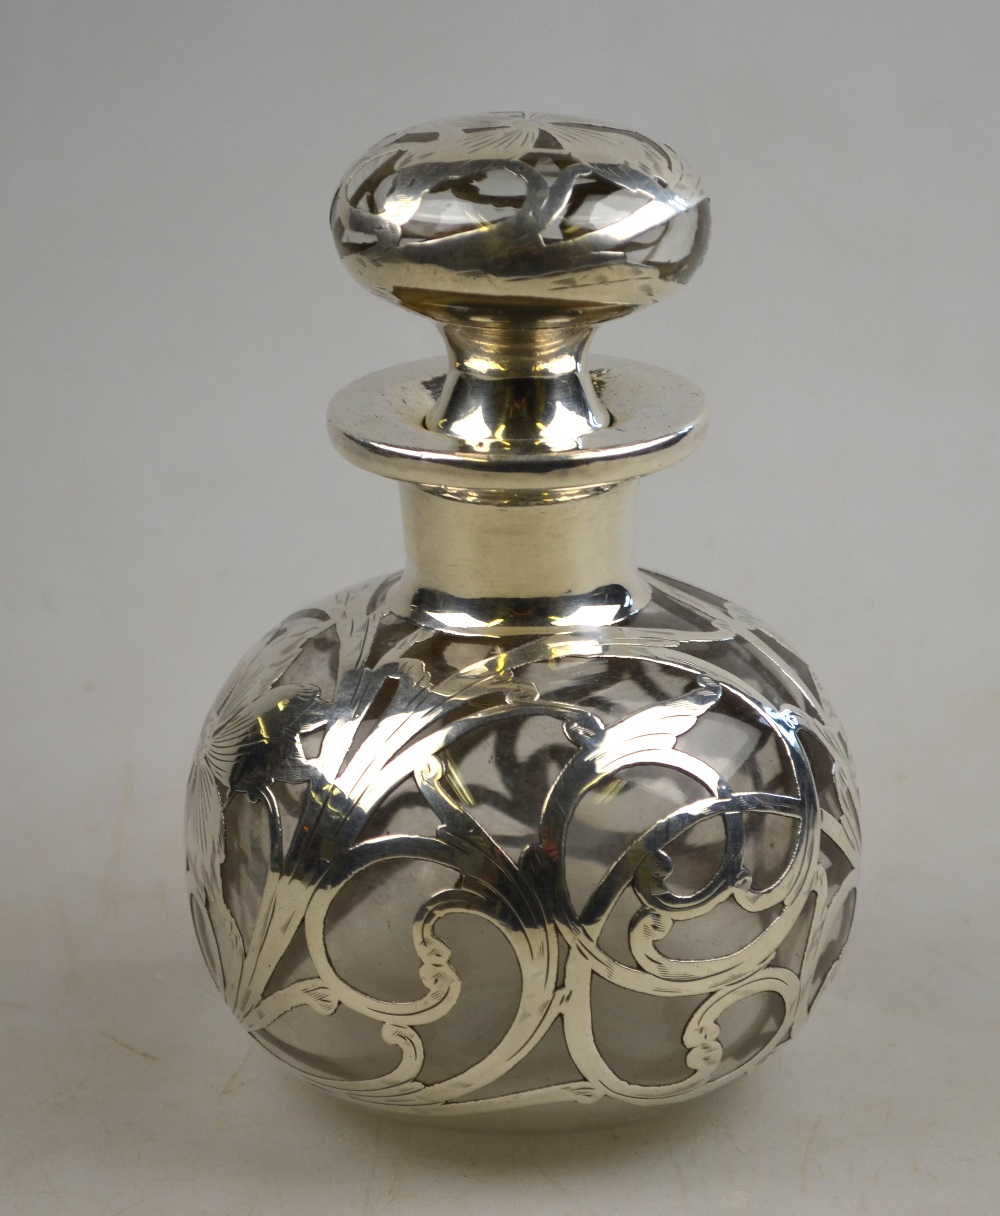 A globular glass scent bottle and stopper with floral and scrolling foliate white metal inlays, 13